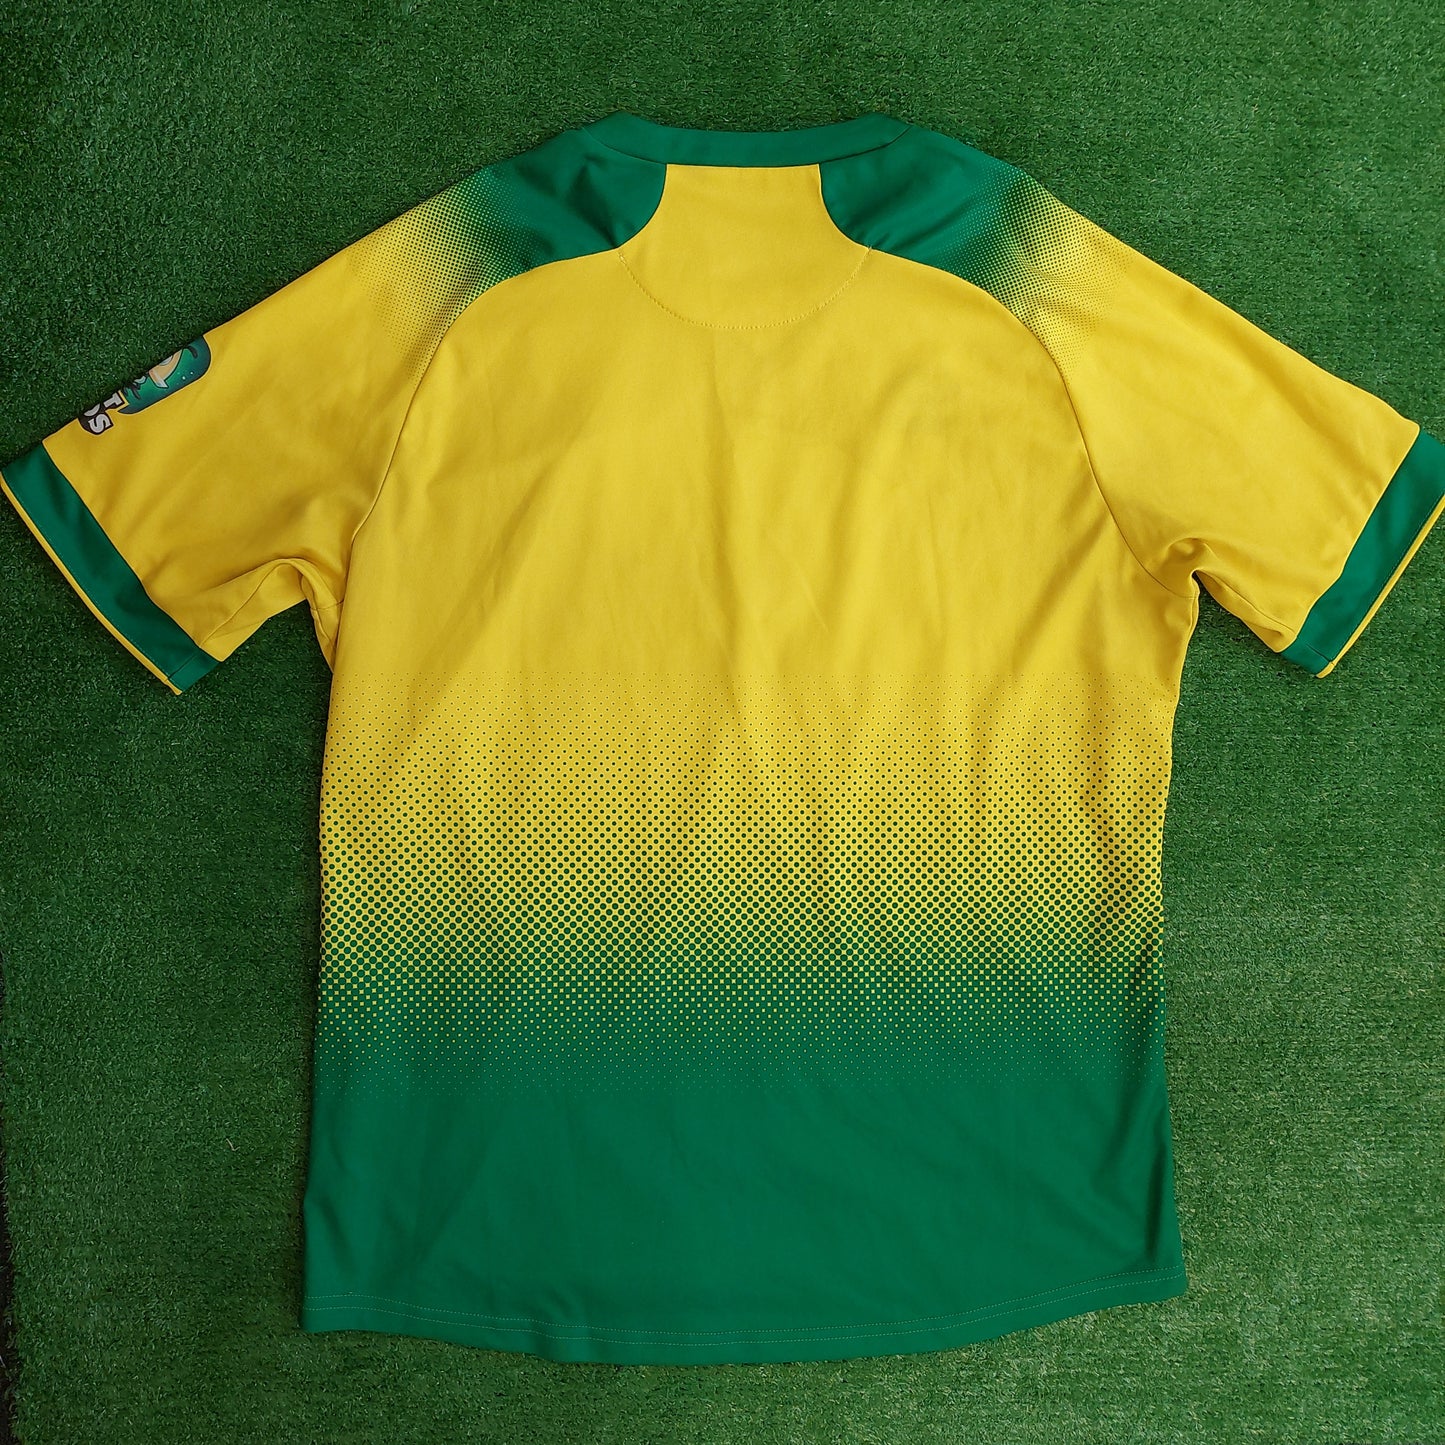 Norwich City 2019/20 Home Shirt (Very Good) - Size 3XL